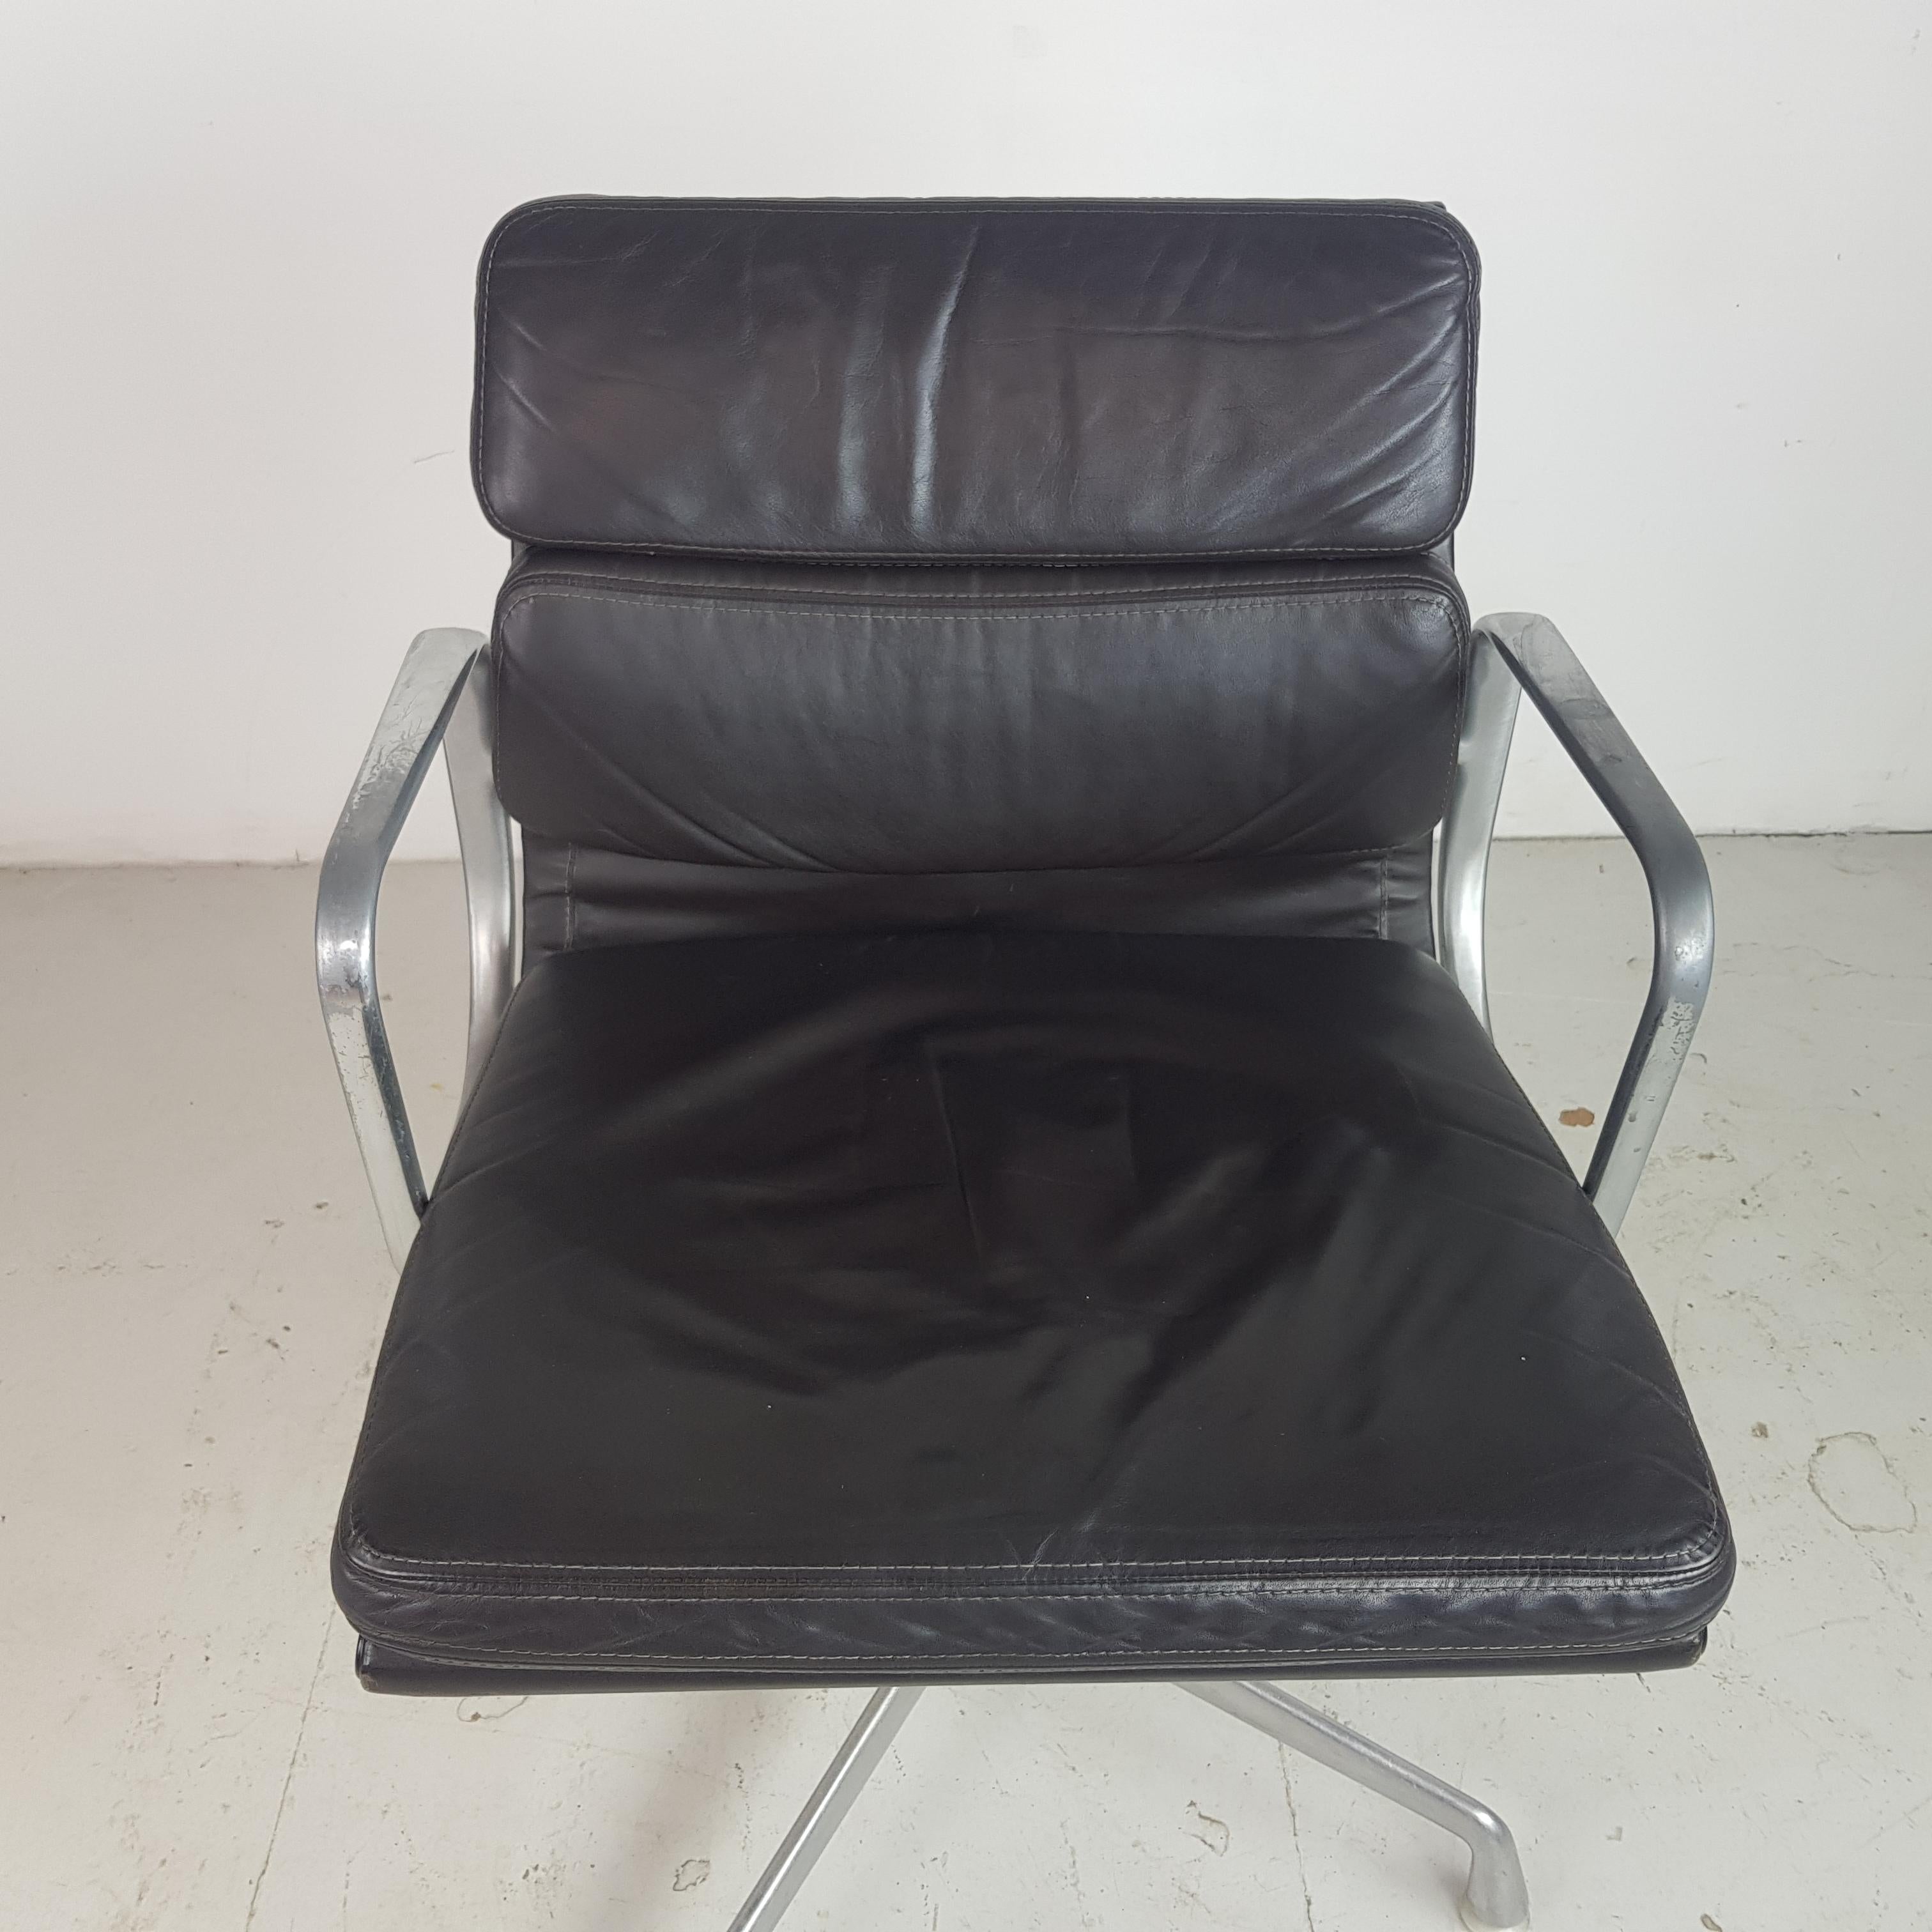 Late 20th Century Vintage Brown Leather Eames for Herman Miller Soft Pad Aluminium Group Chair For Sale